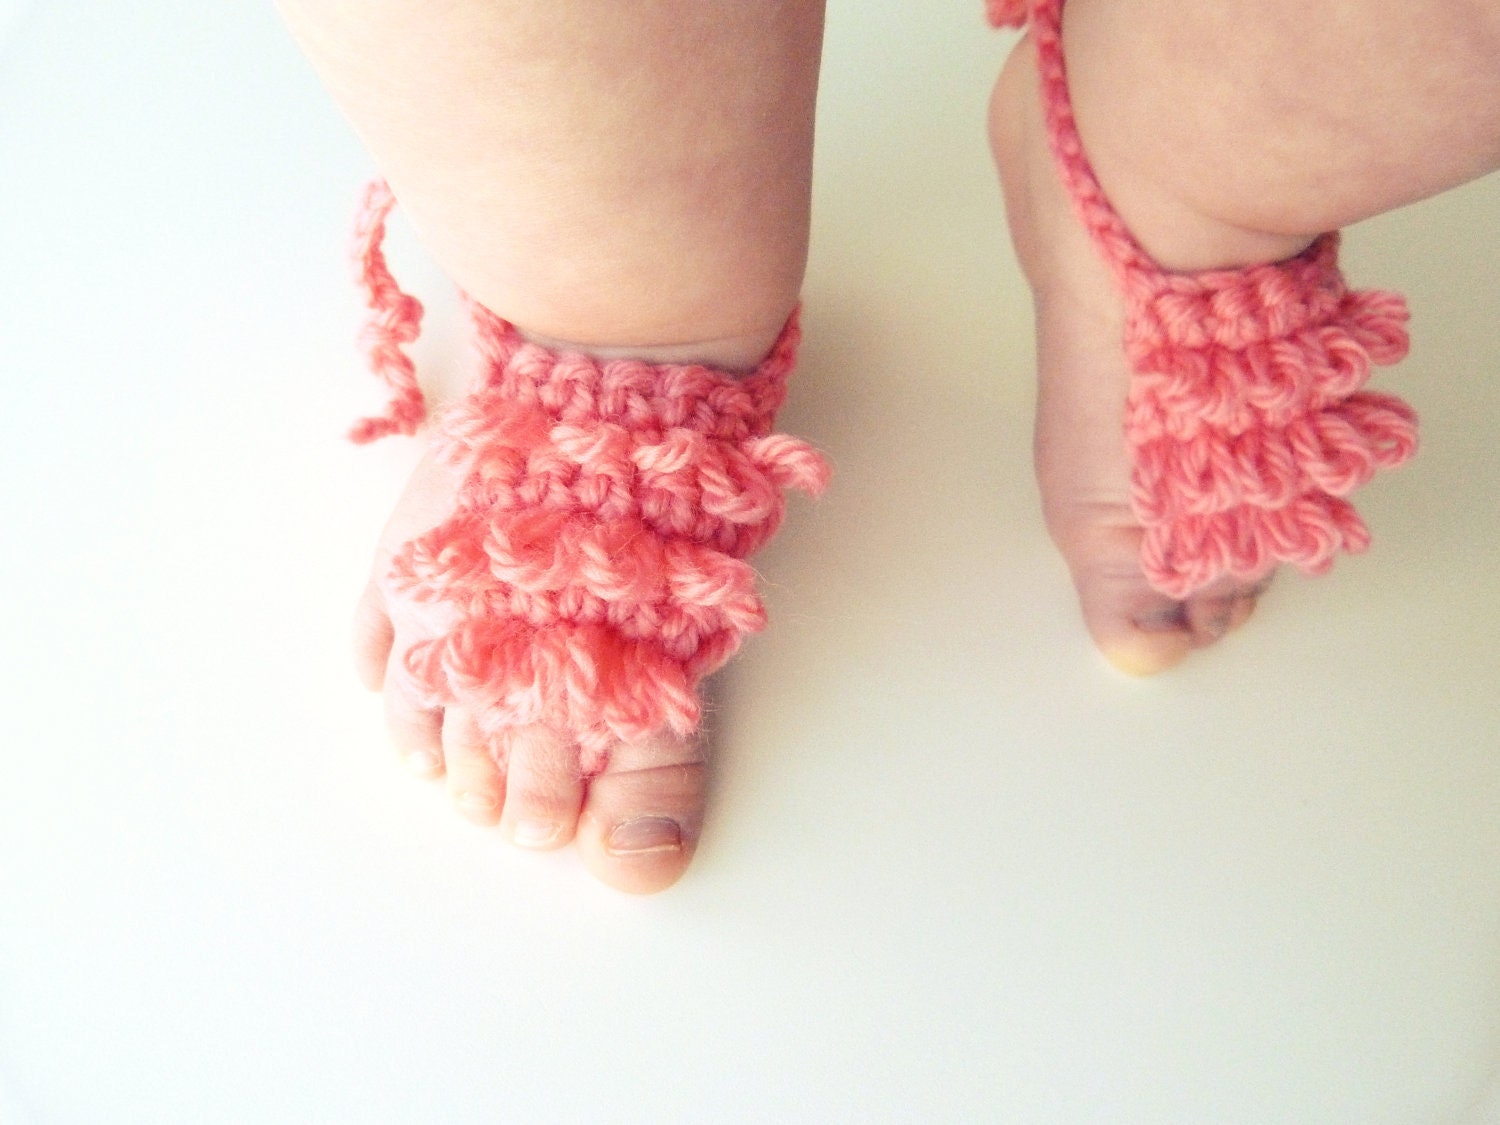 SALE-Any ColorBaby Barefoot SandalsCrochet baby by SweetlaceShop